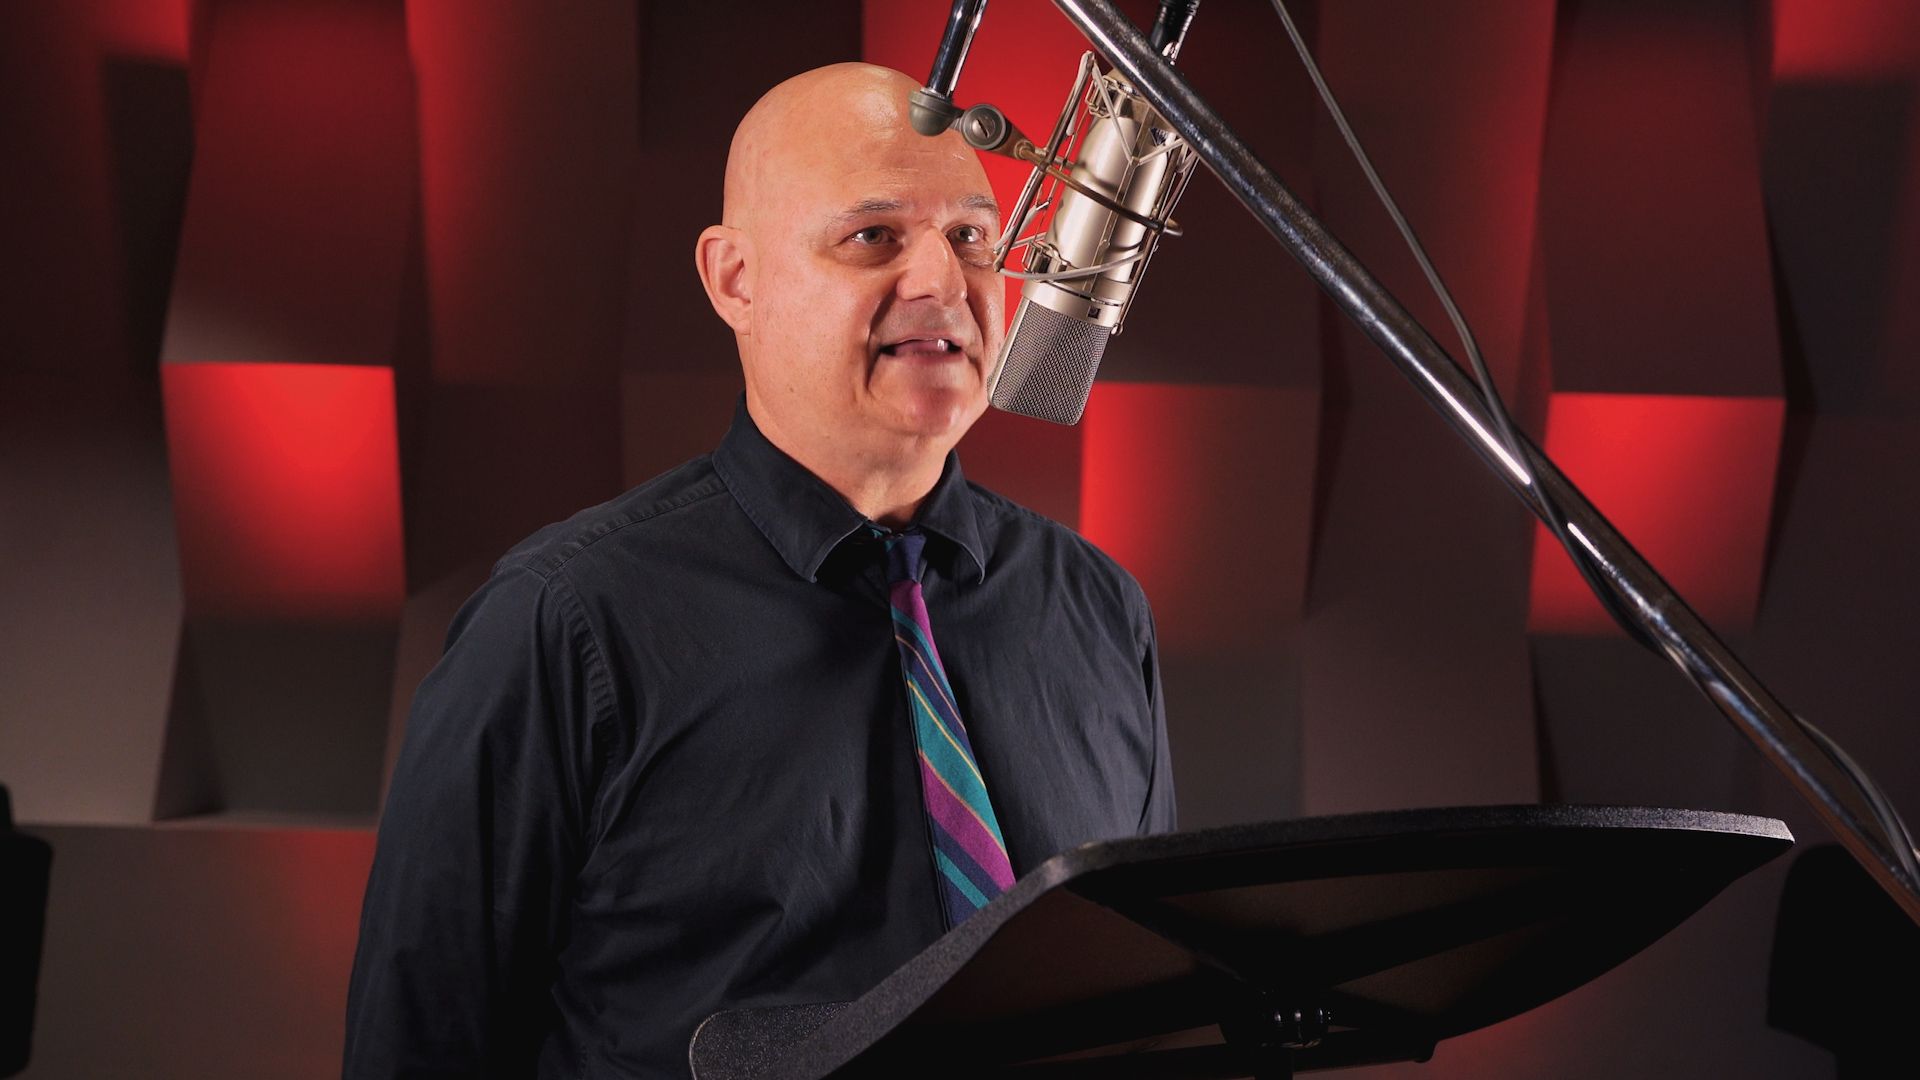 a man in a black shirt and tie is singing into a microphone .